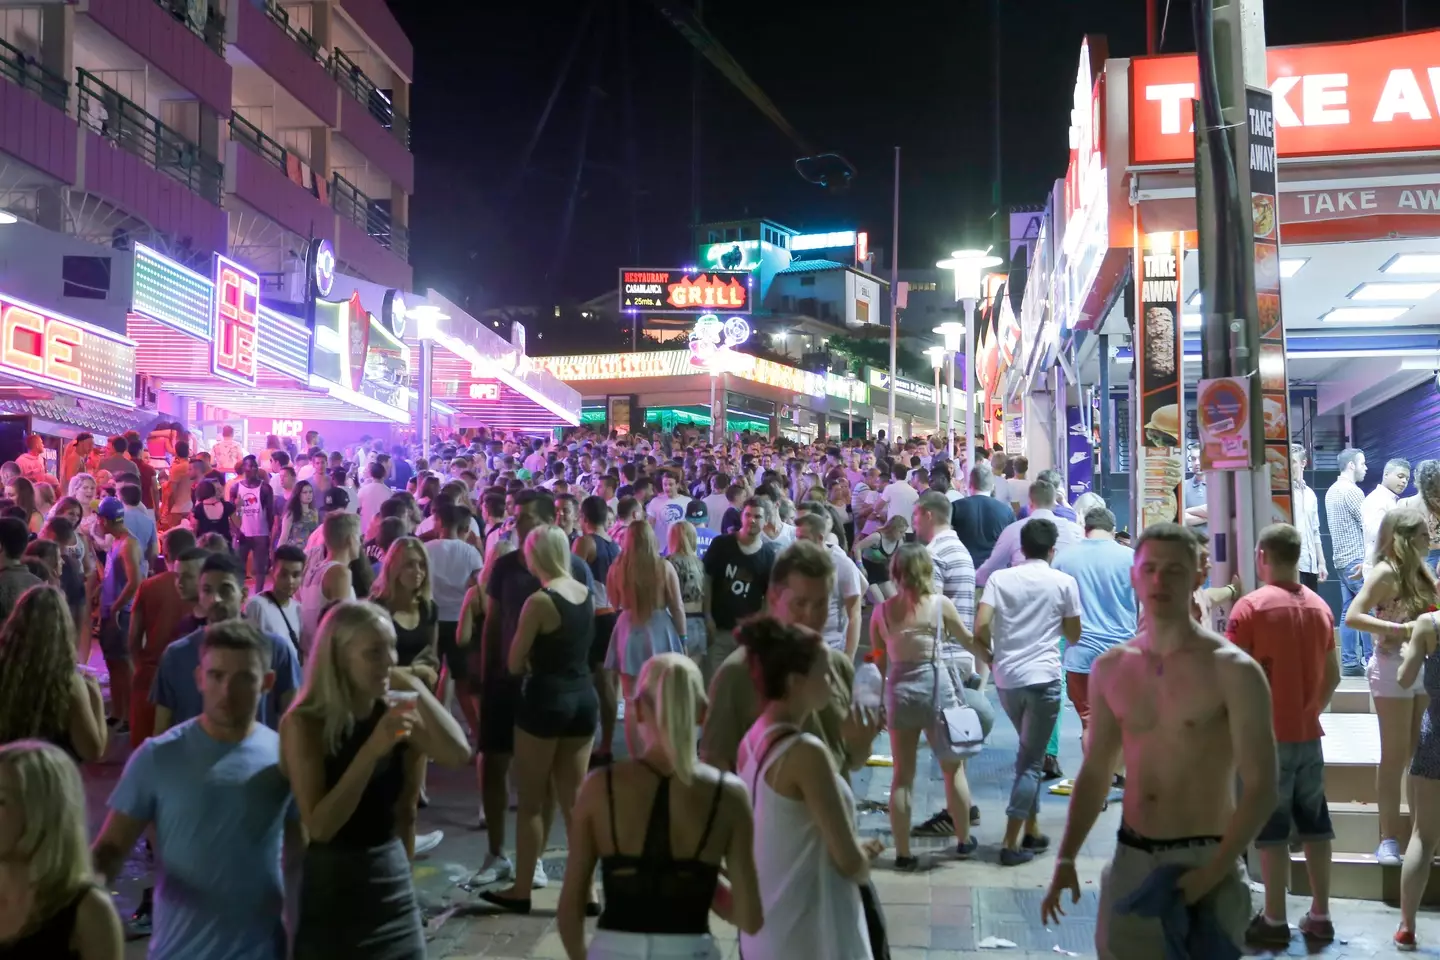 Magaluf is an island typically known for its nightlife over its cost-effective breakfasts.